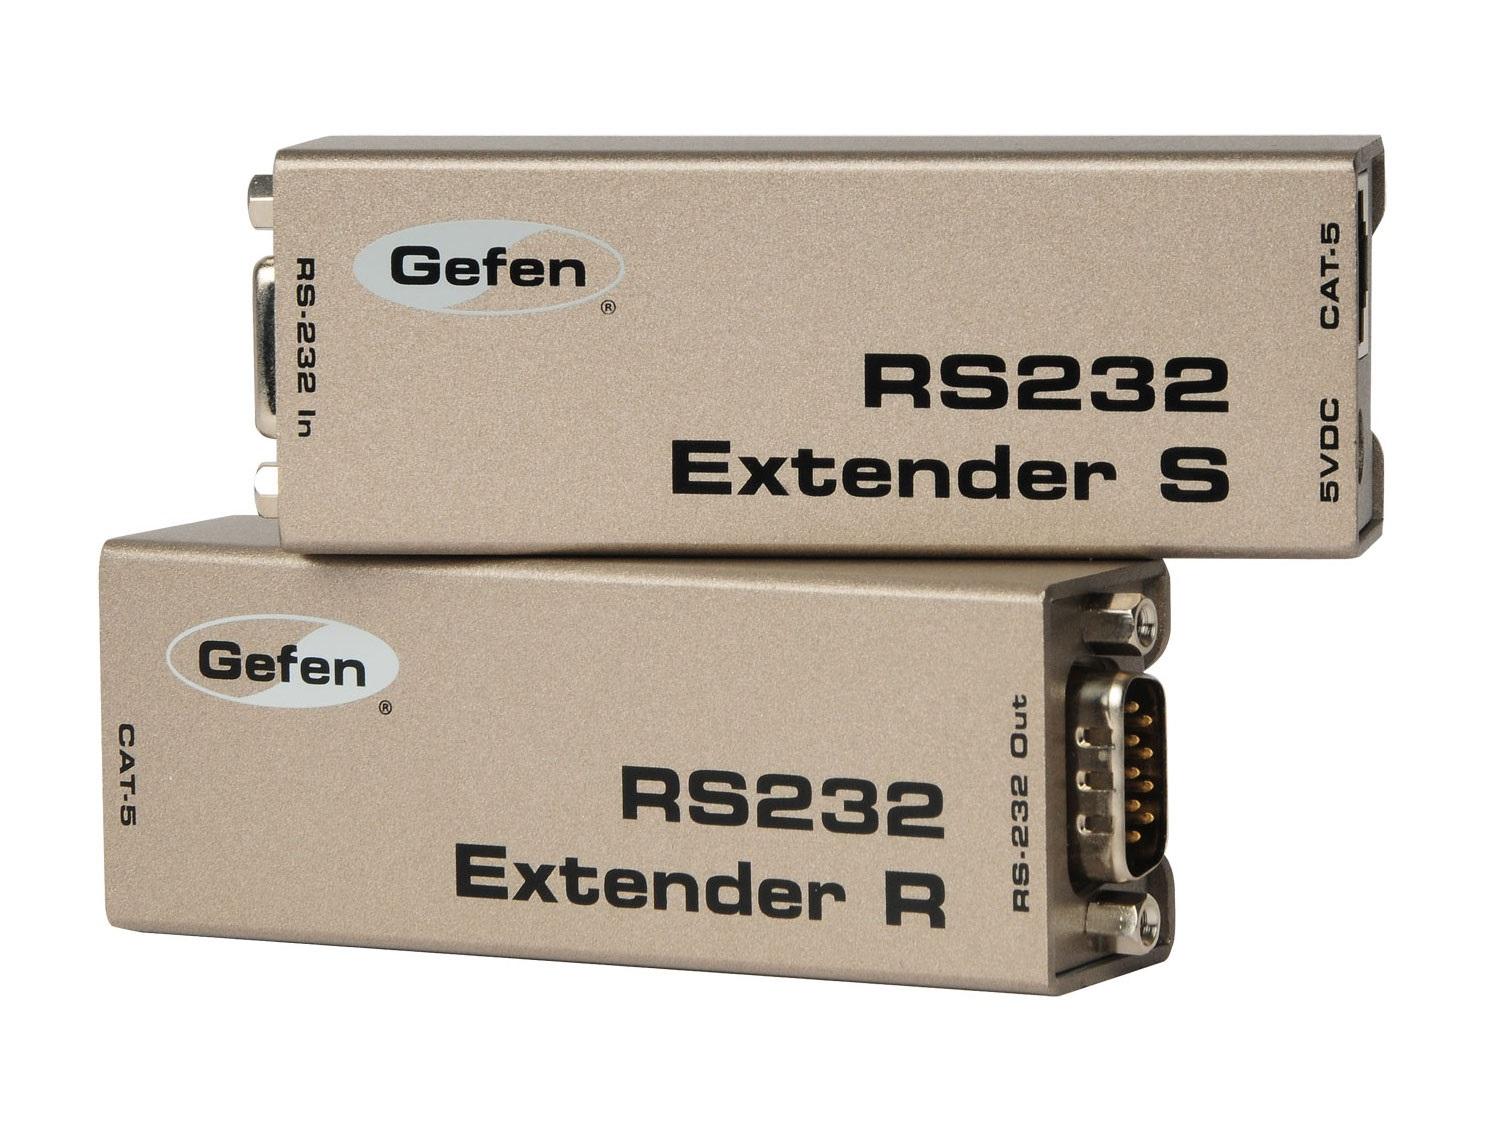 EXT-RS232 RS-232 Extender(Sender/Receiver) Kit  up to 1000 feet by Gefen